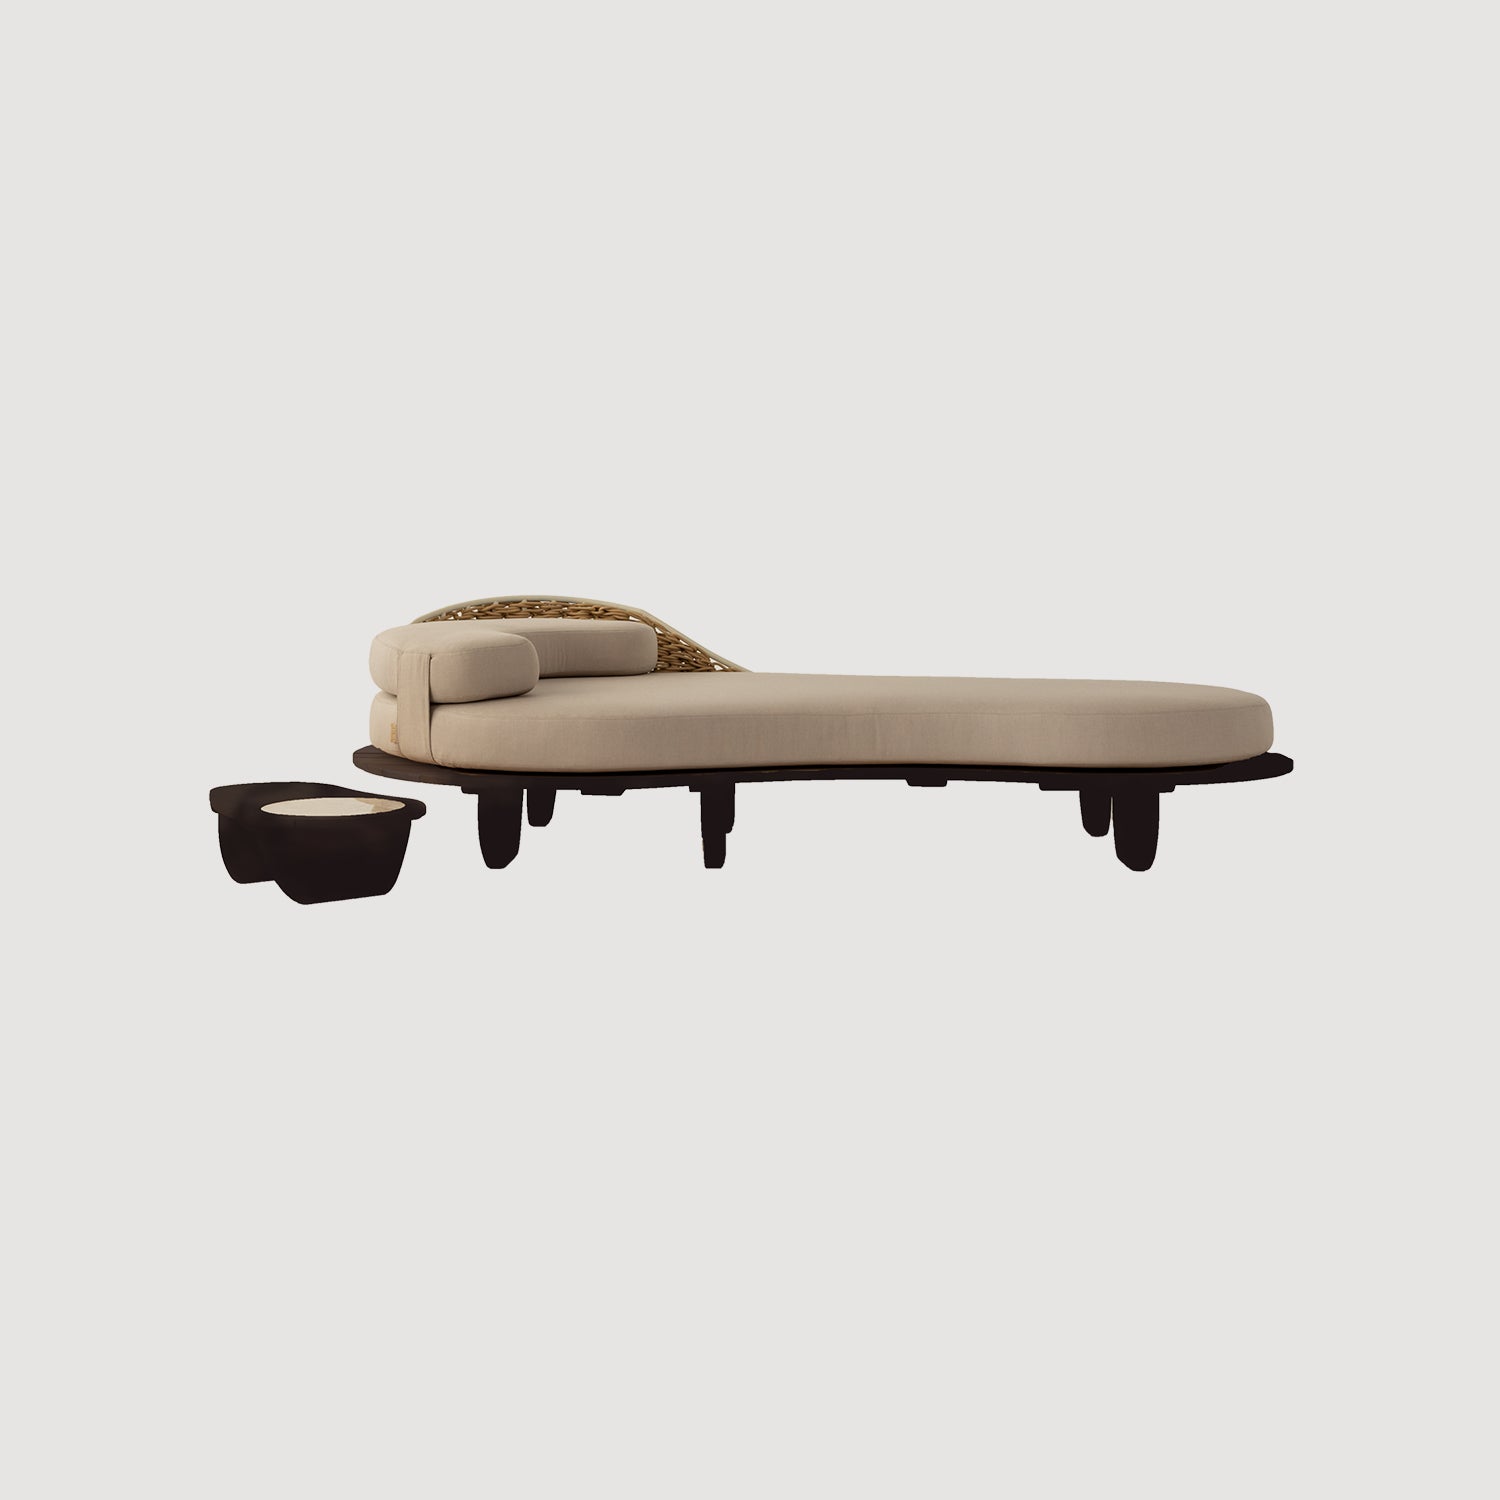 The Sayari Indoor / Outdoor Daybed Chaise and Table Collection by Studio Lloyd